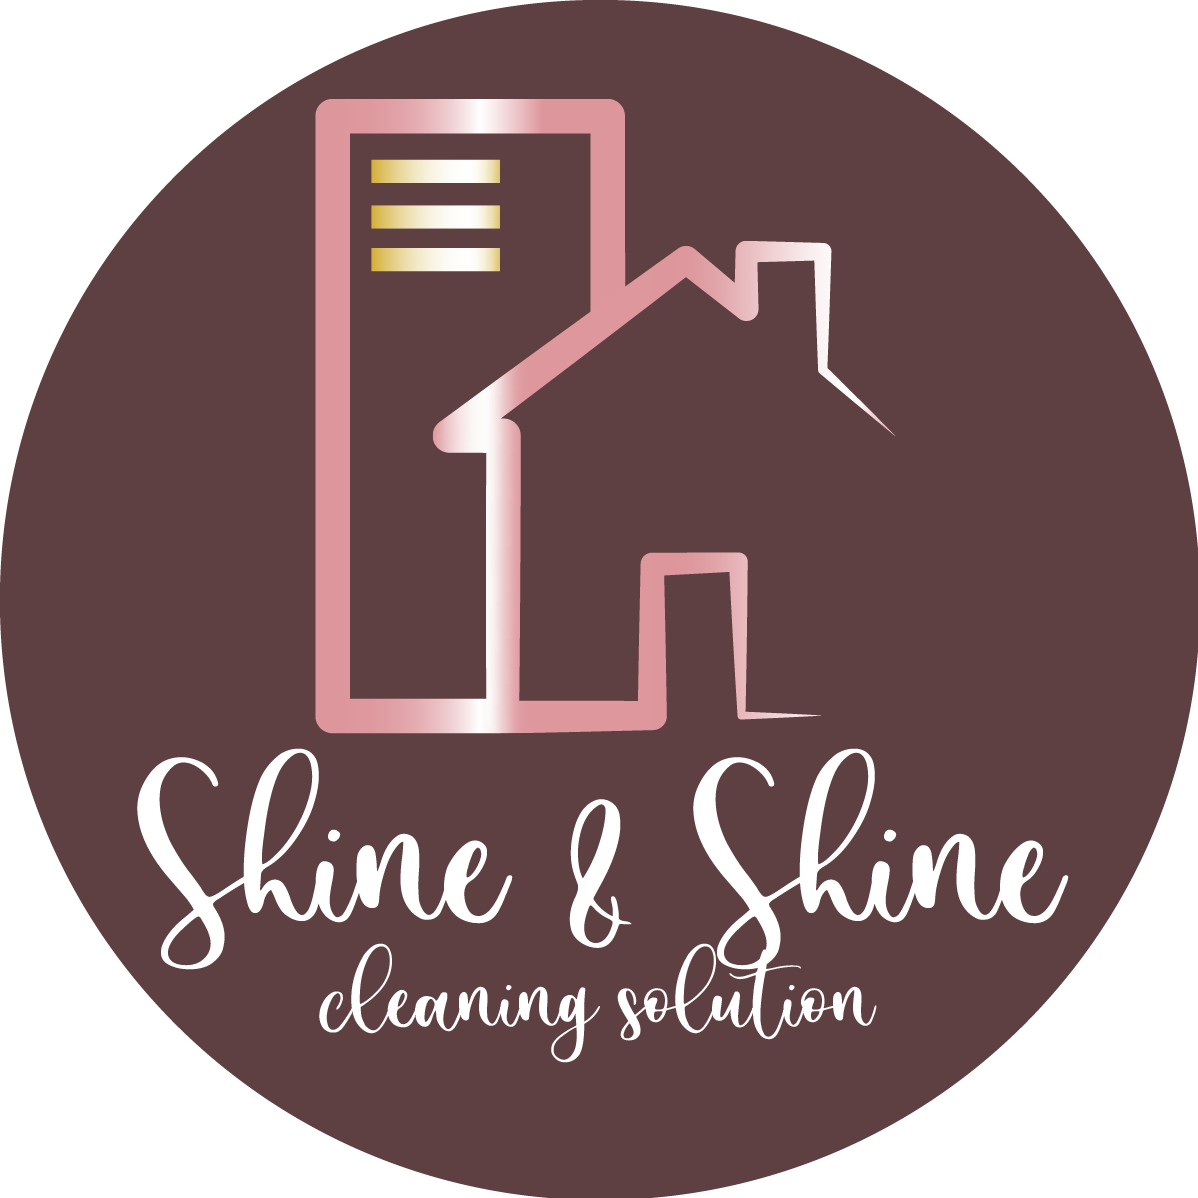 Shine & Shine Cleaning Solutions